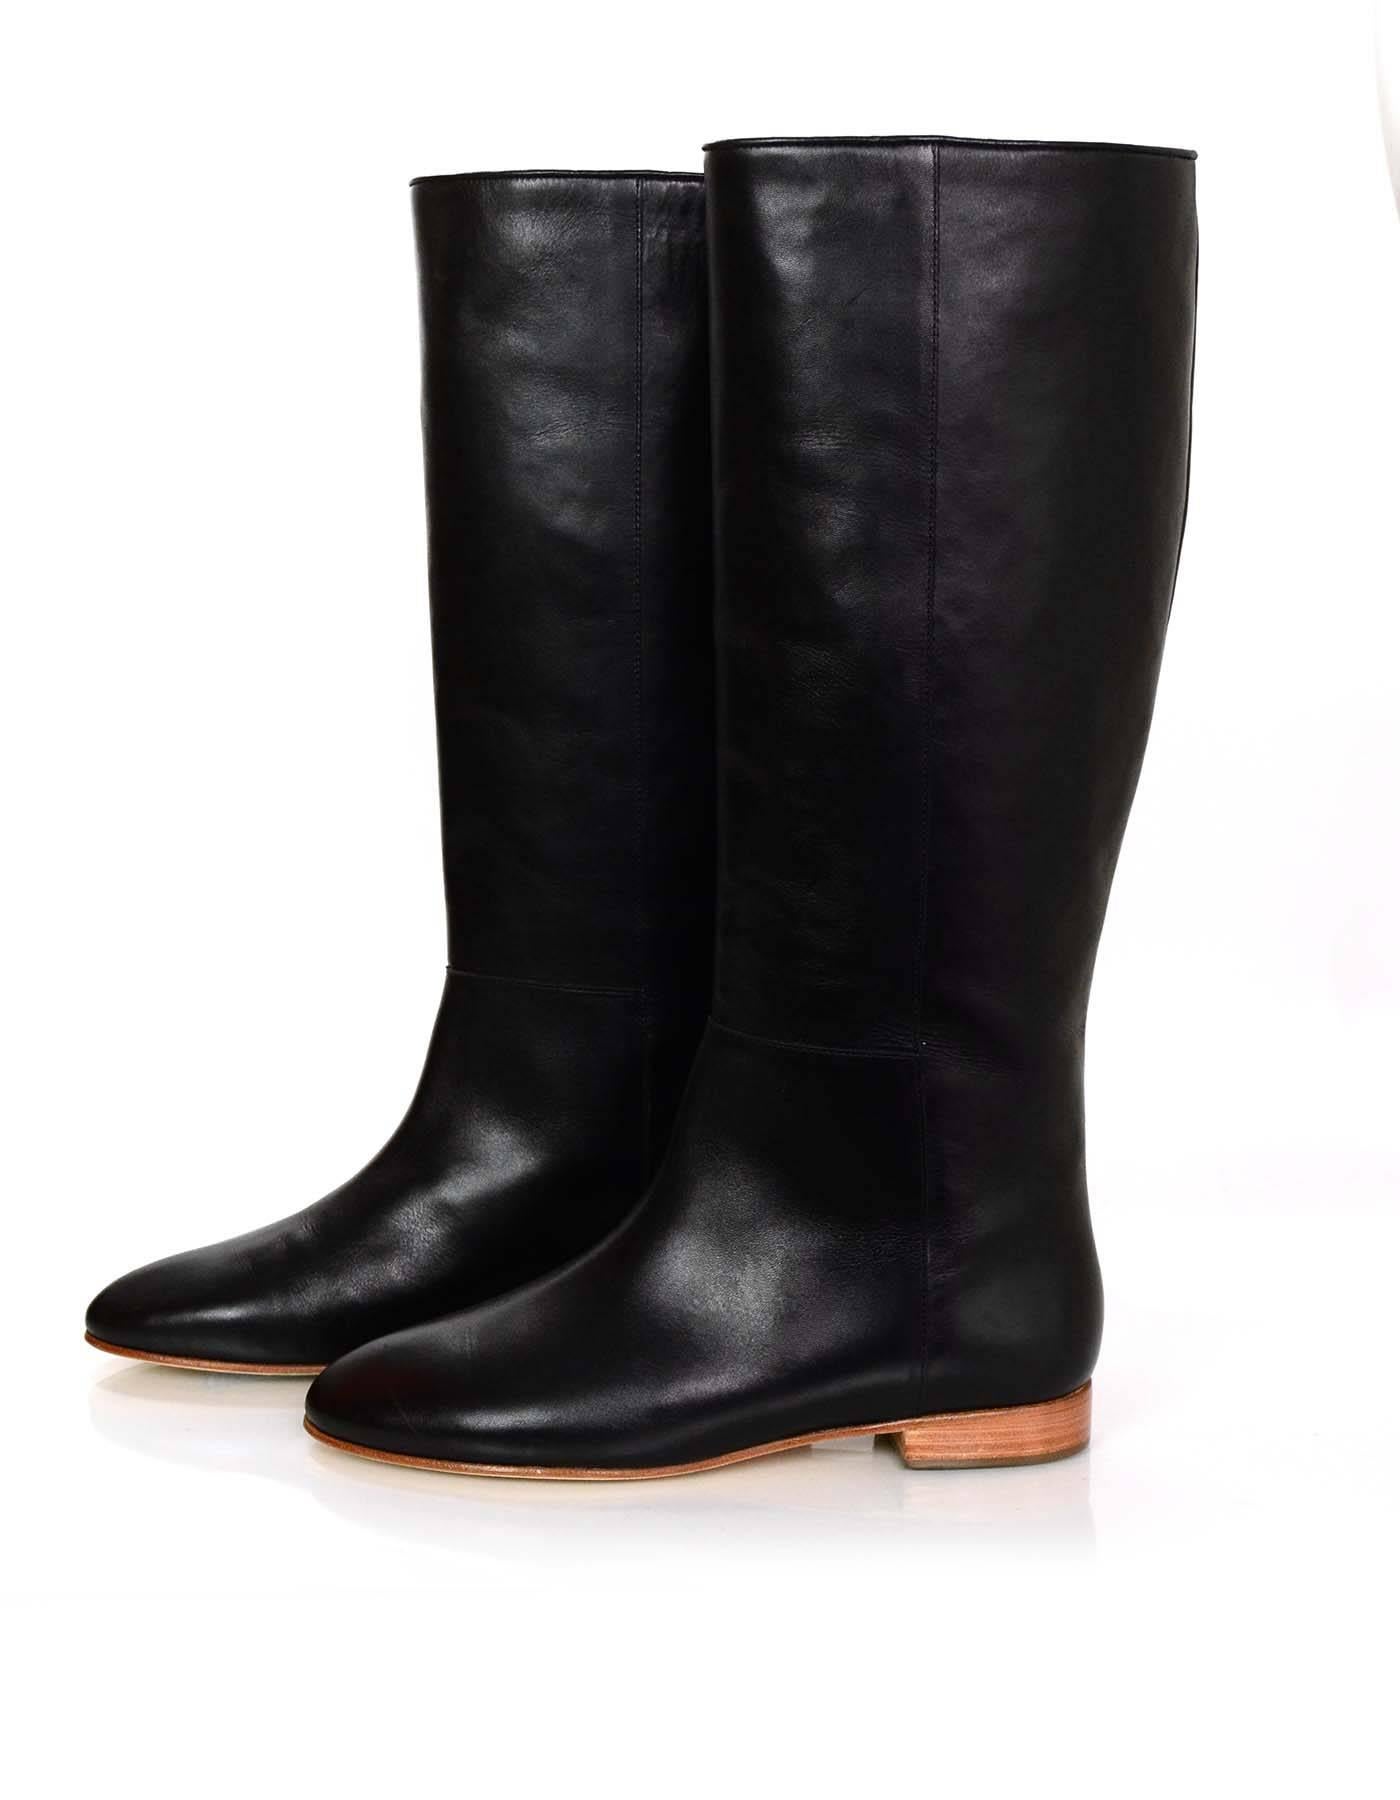 Loeffler Randall Black Leather Boots Sz 8

Made In: Brazil
Color: Black
Materials: Leather
Closure/Opening: Pull on
Sole Stamp: Loeffler Randall vero cuoio 8
Overall Condition: Excellent pre-owned condition with the exception of very light